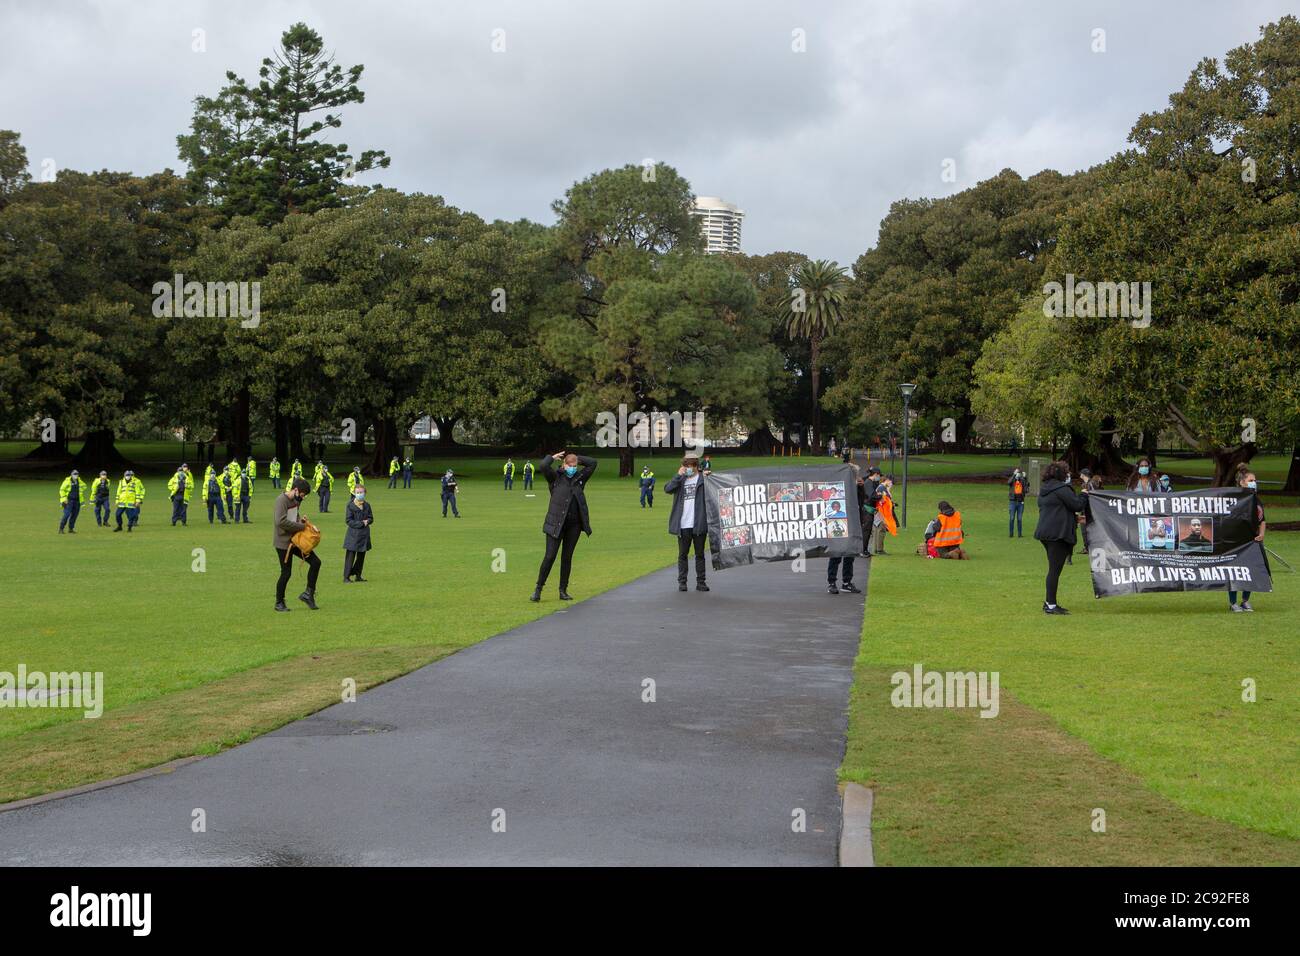 Sydney, Australia. 28th July 2020. Black Lives matter protesters come out in support of the Dungay family,. The Domain, Sydney Australia..Credit: Brad McDonald/ Alamy Live News' Stock Photo